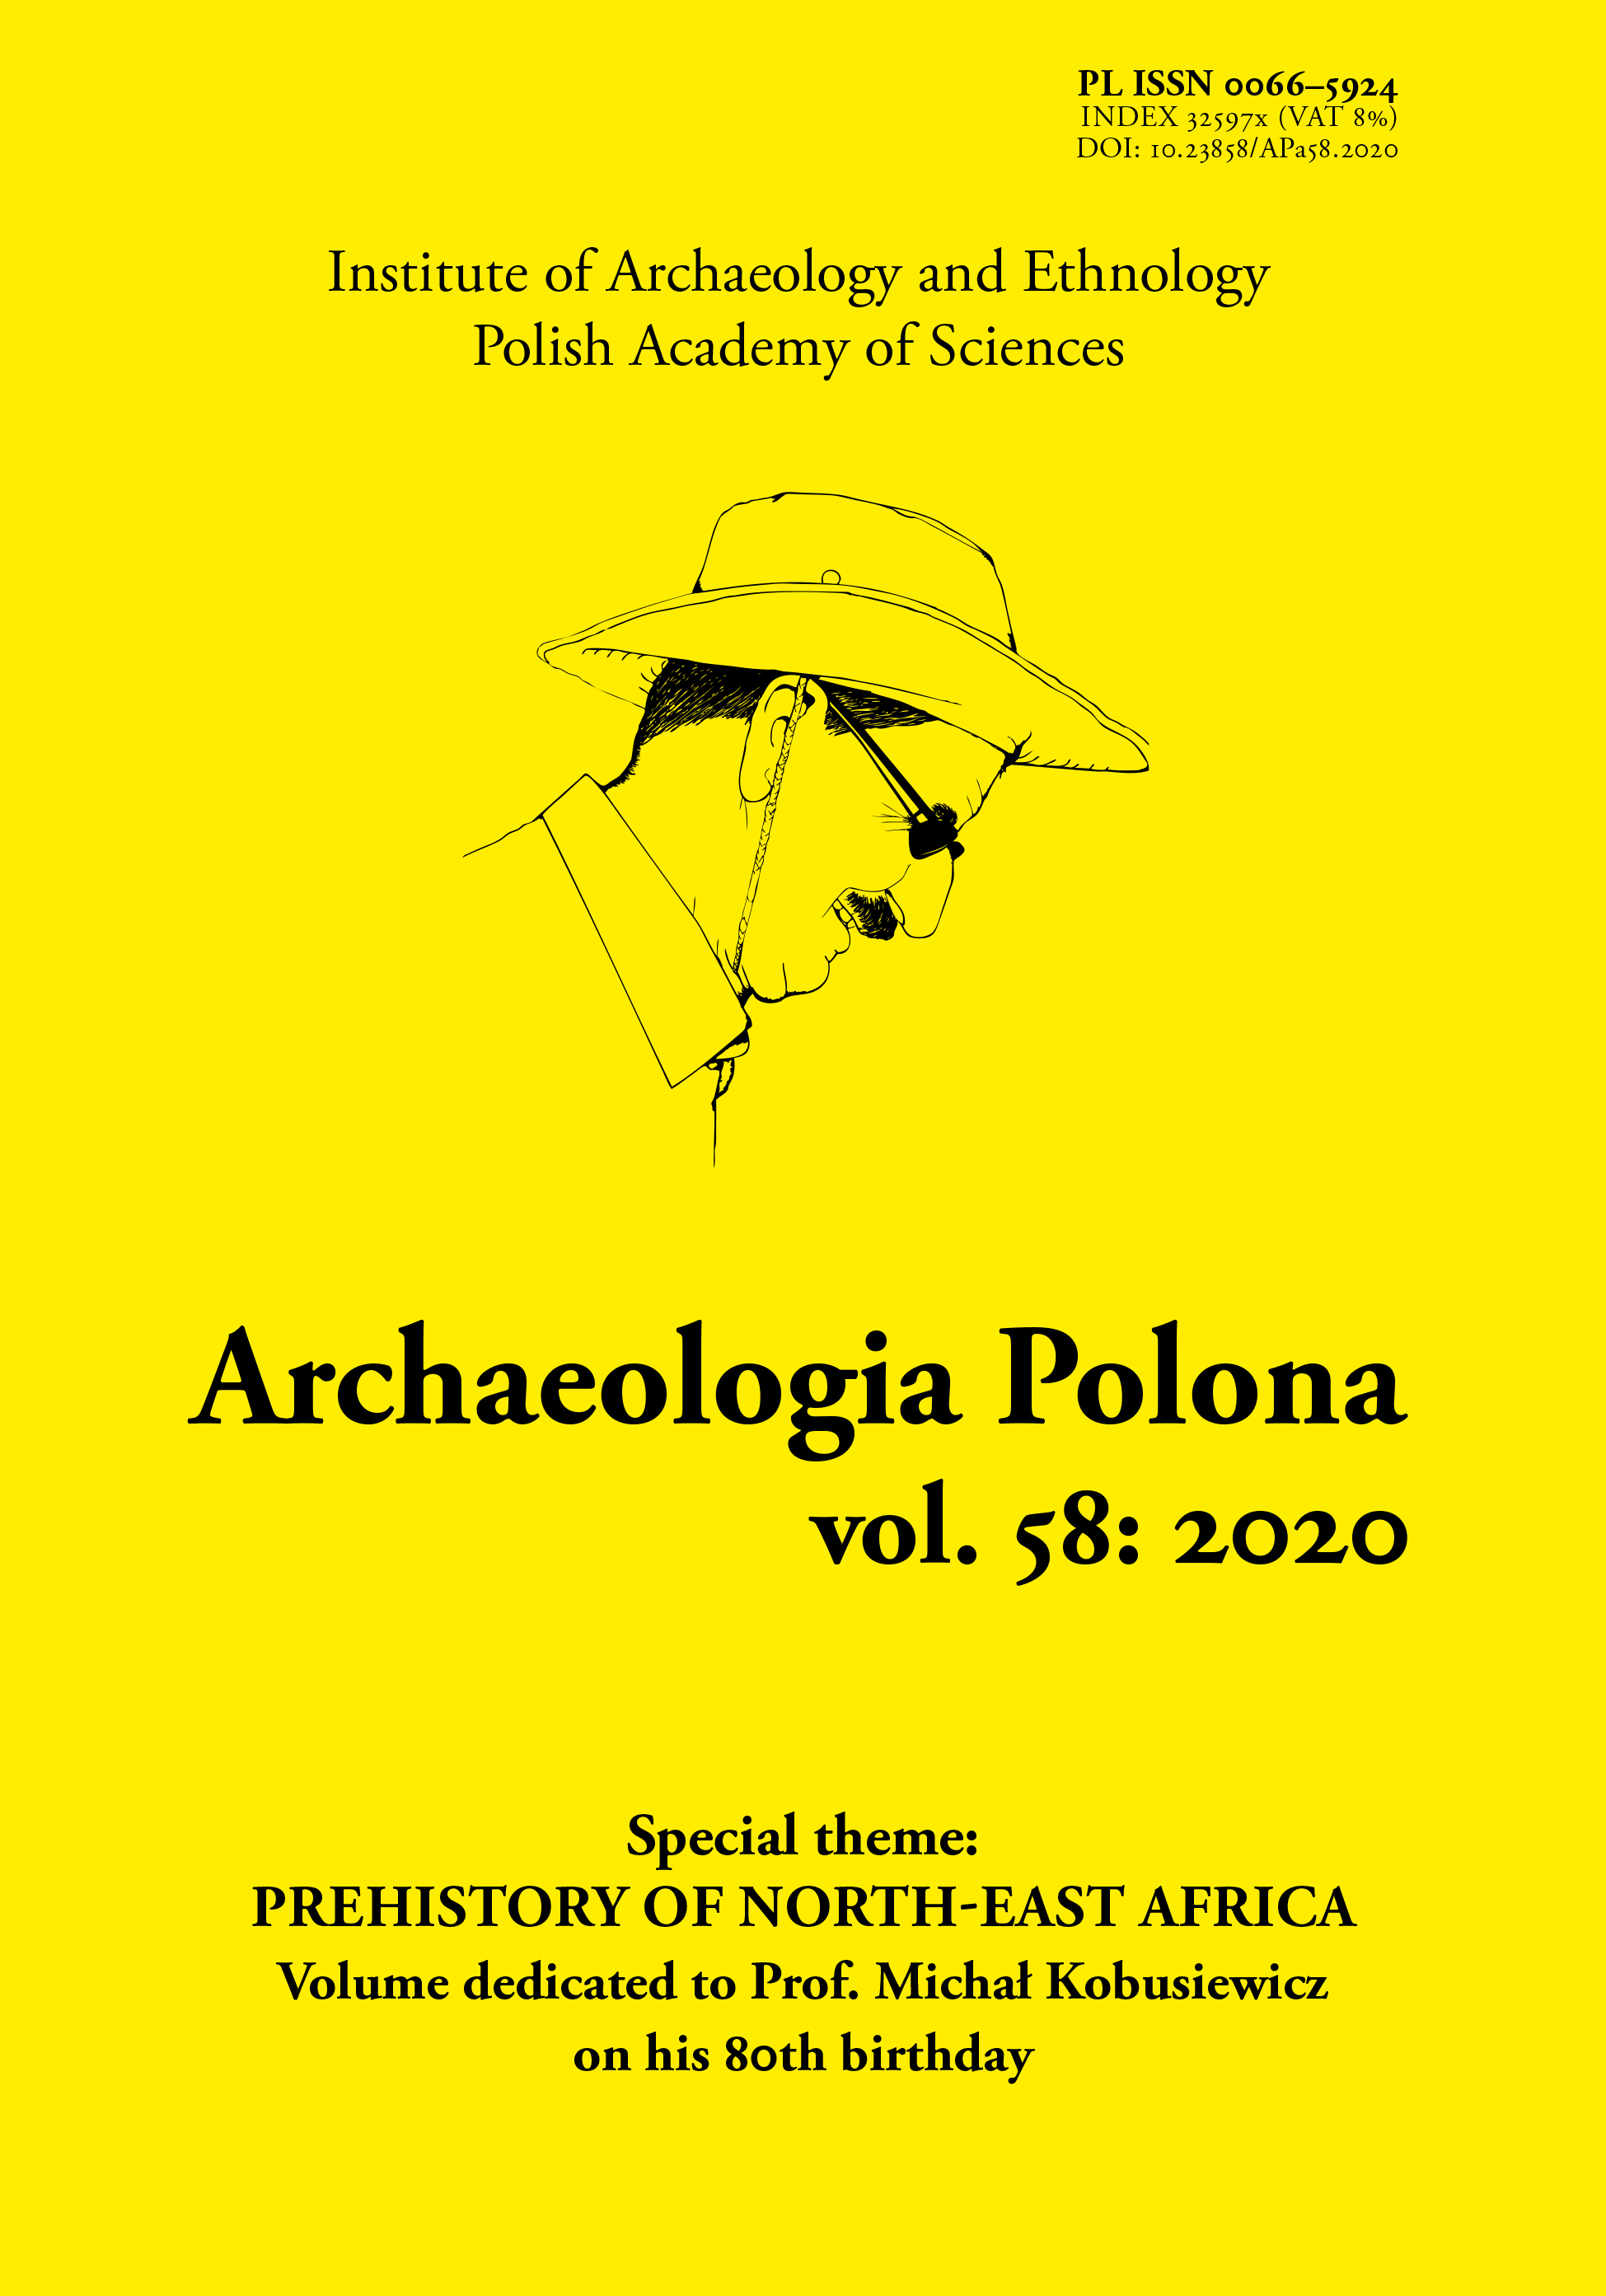 Prehistory of North-East Africa